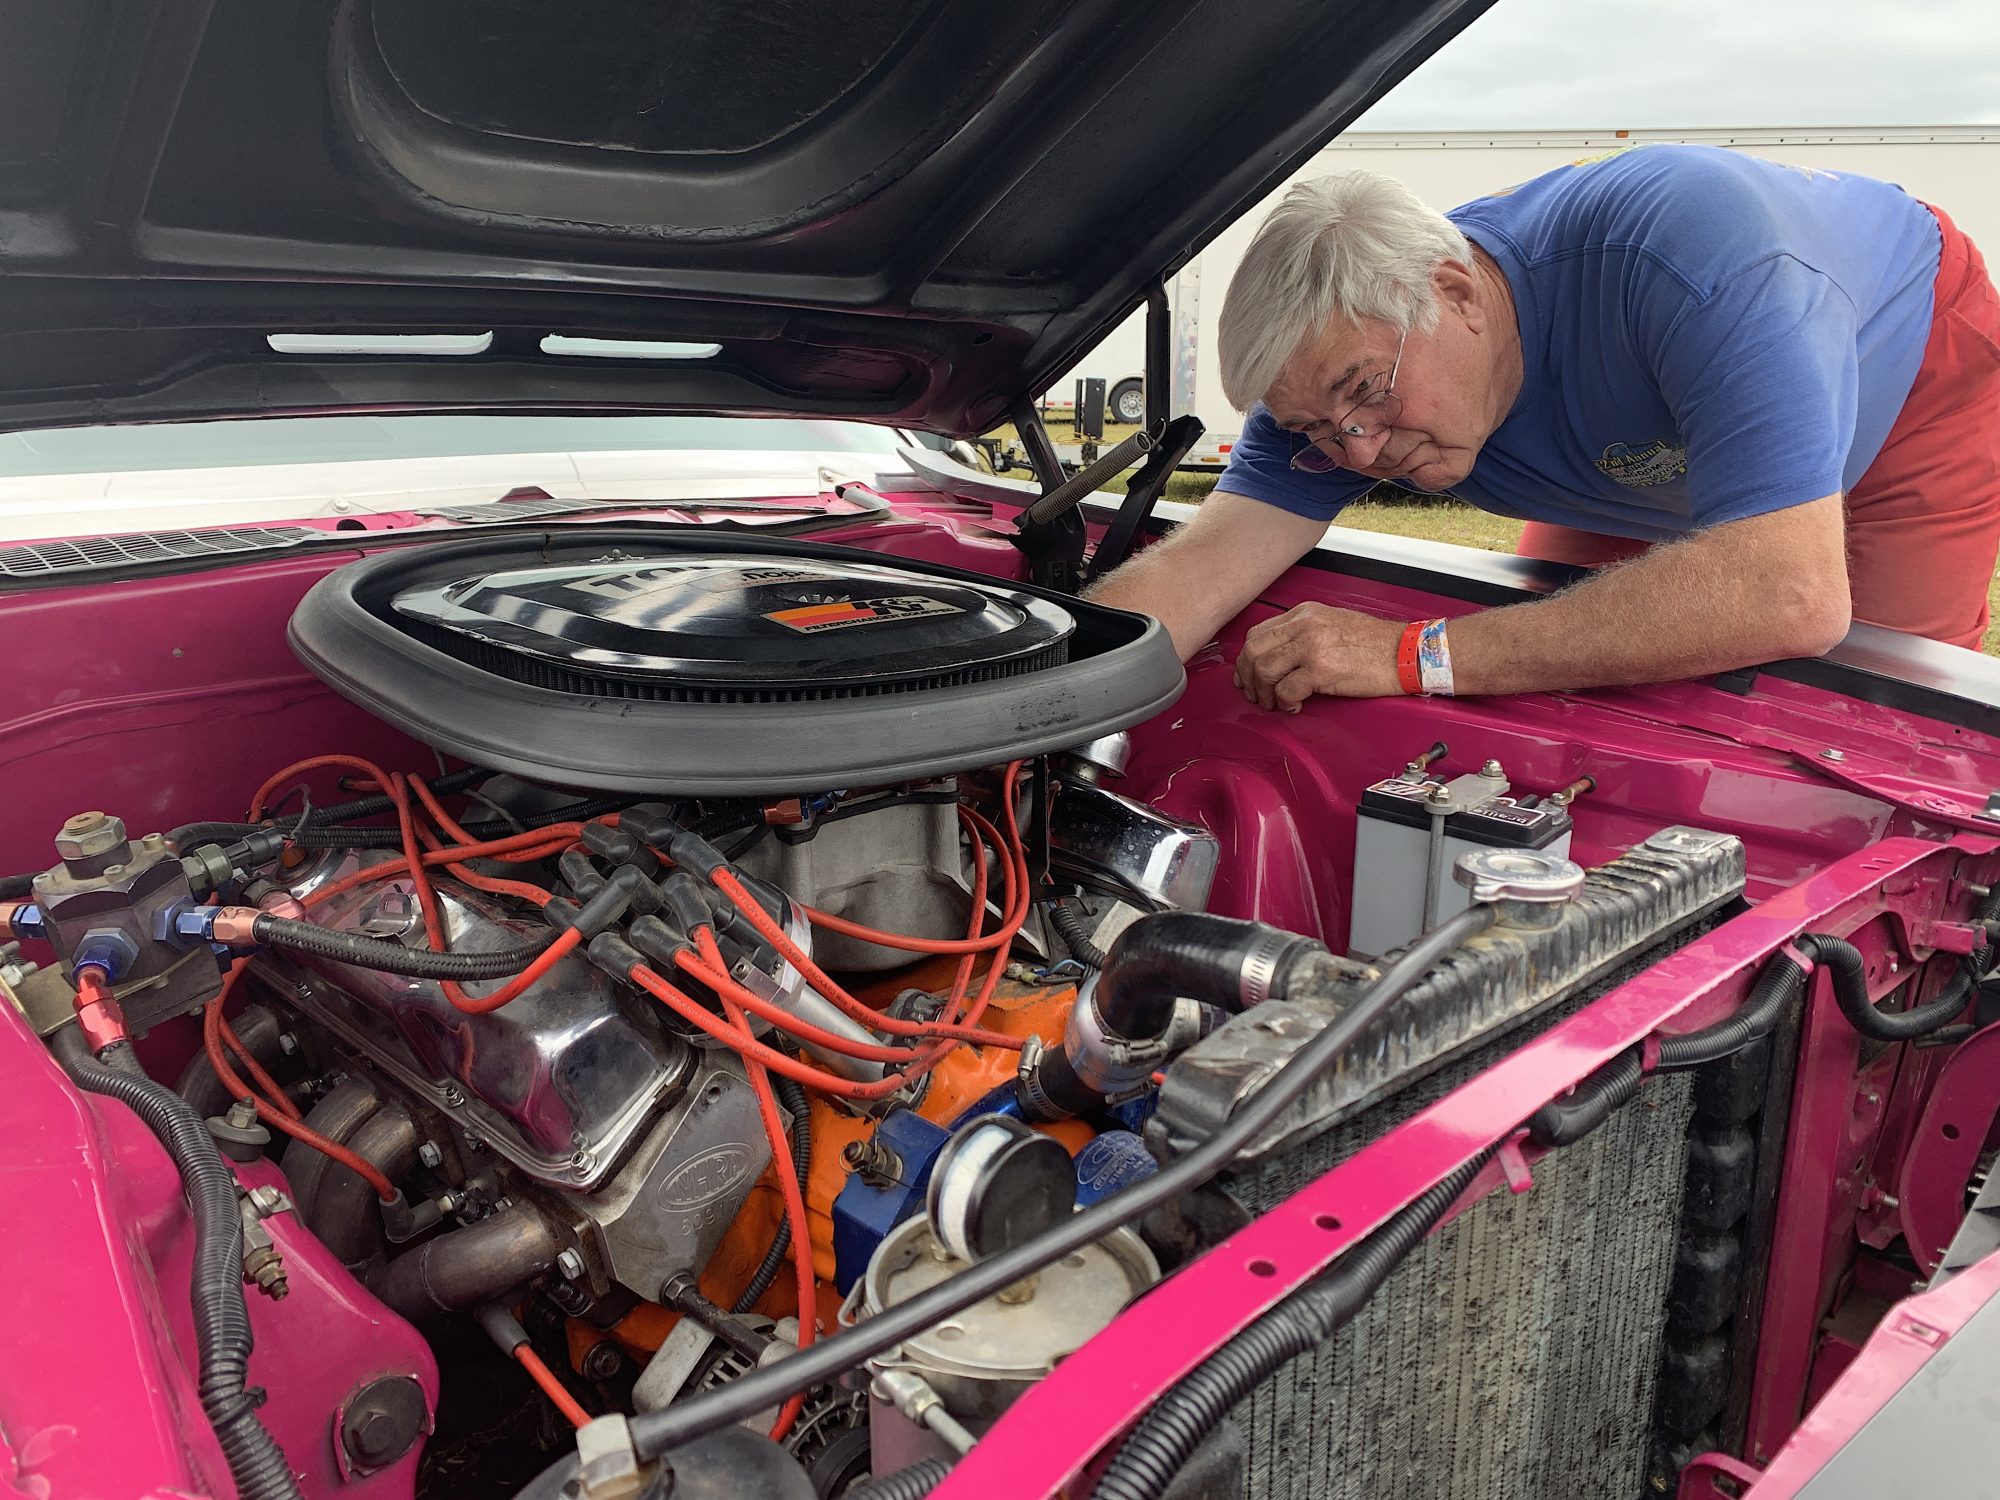 Larry Hill working on his car